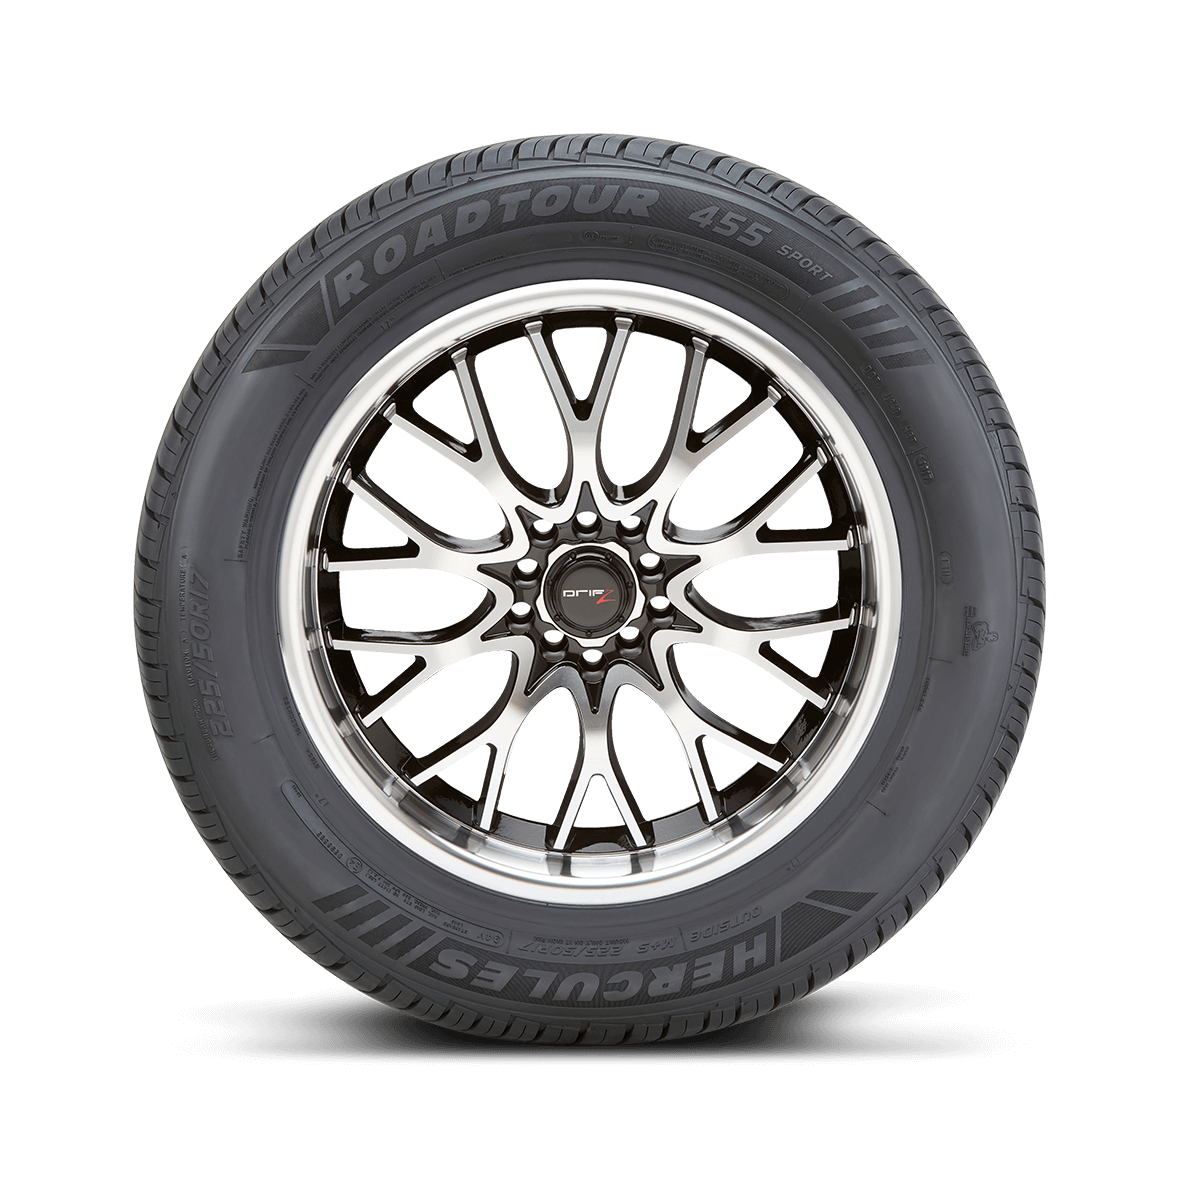 Straight on view of the Roadtour 455 Sport sidewall design and rim on a white background. 